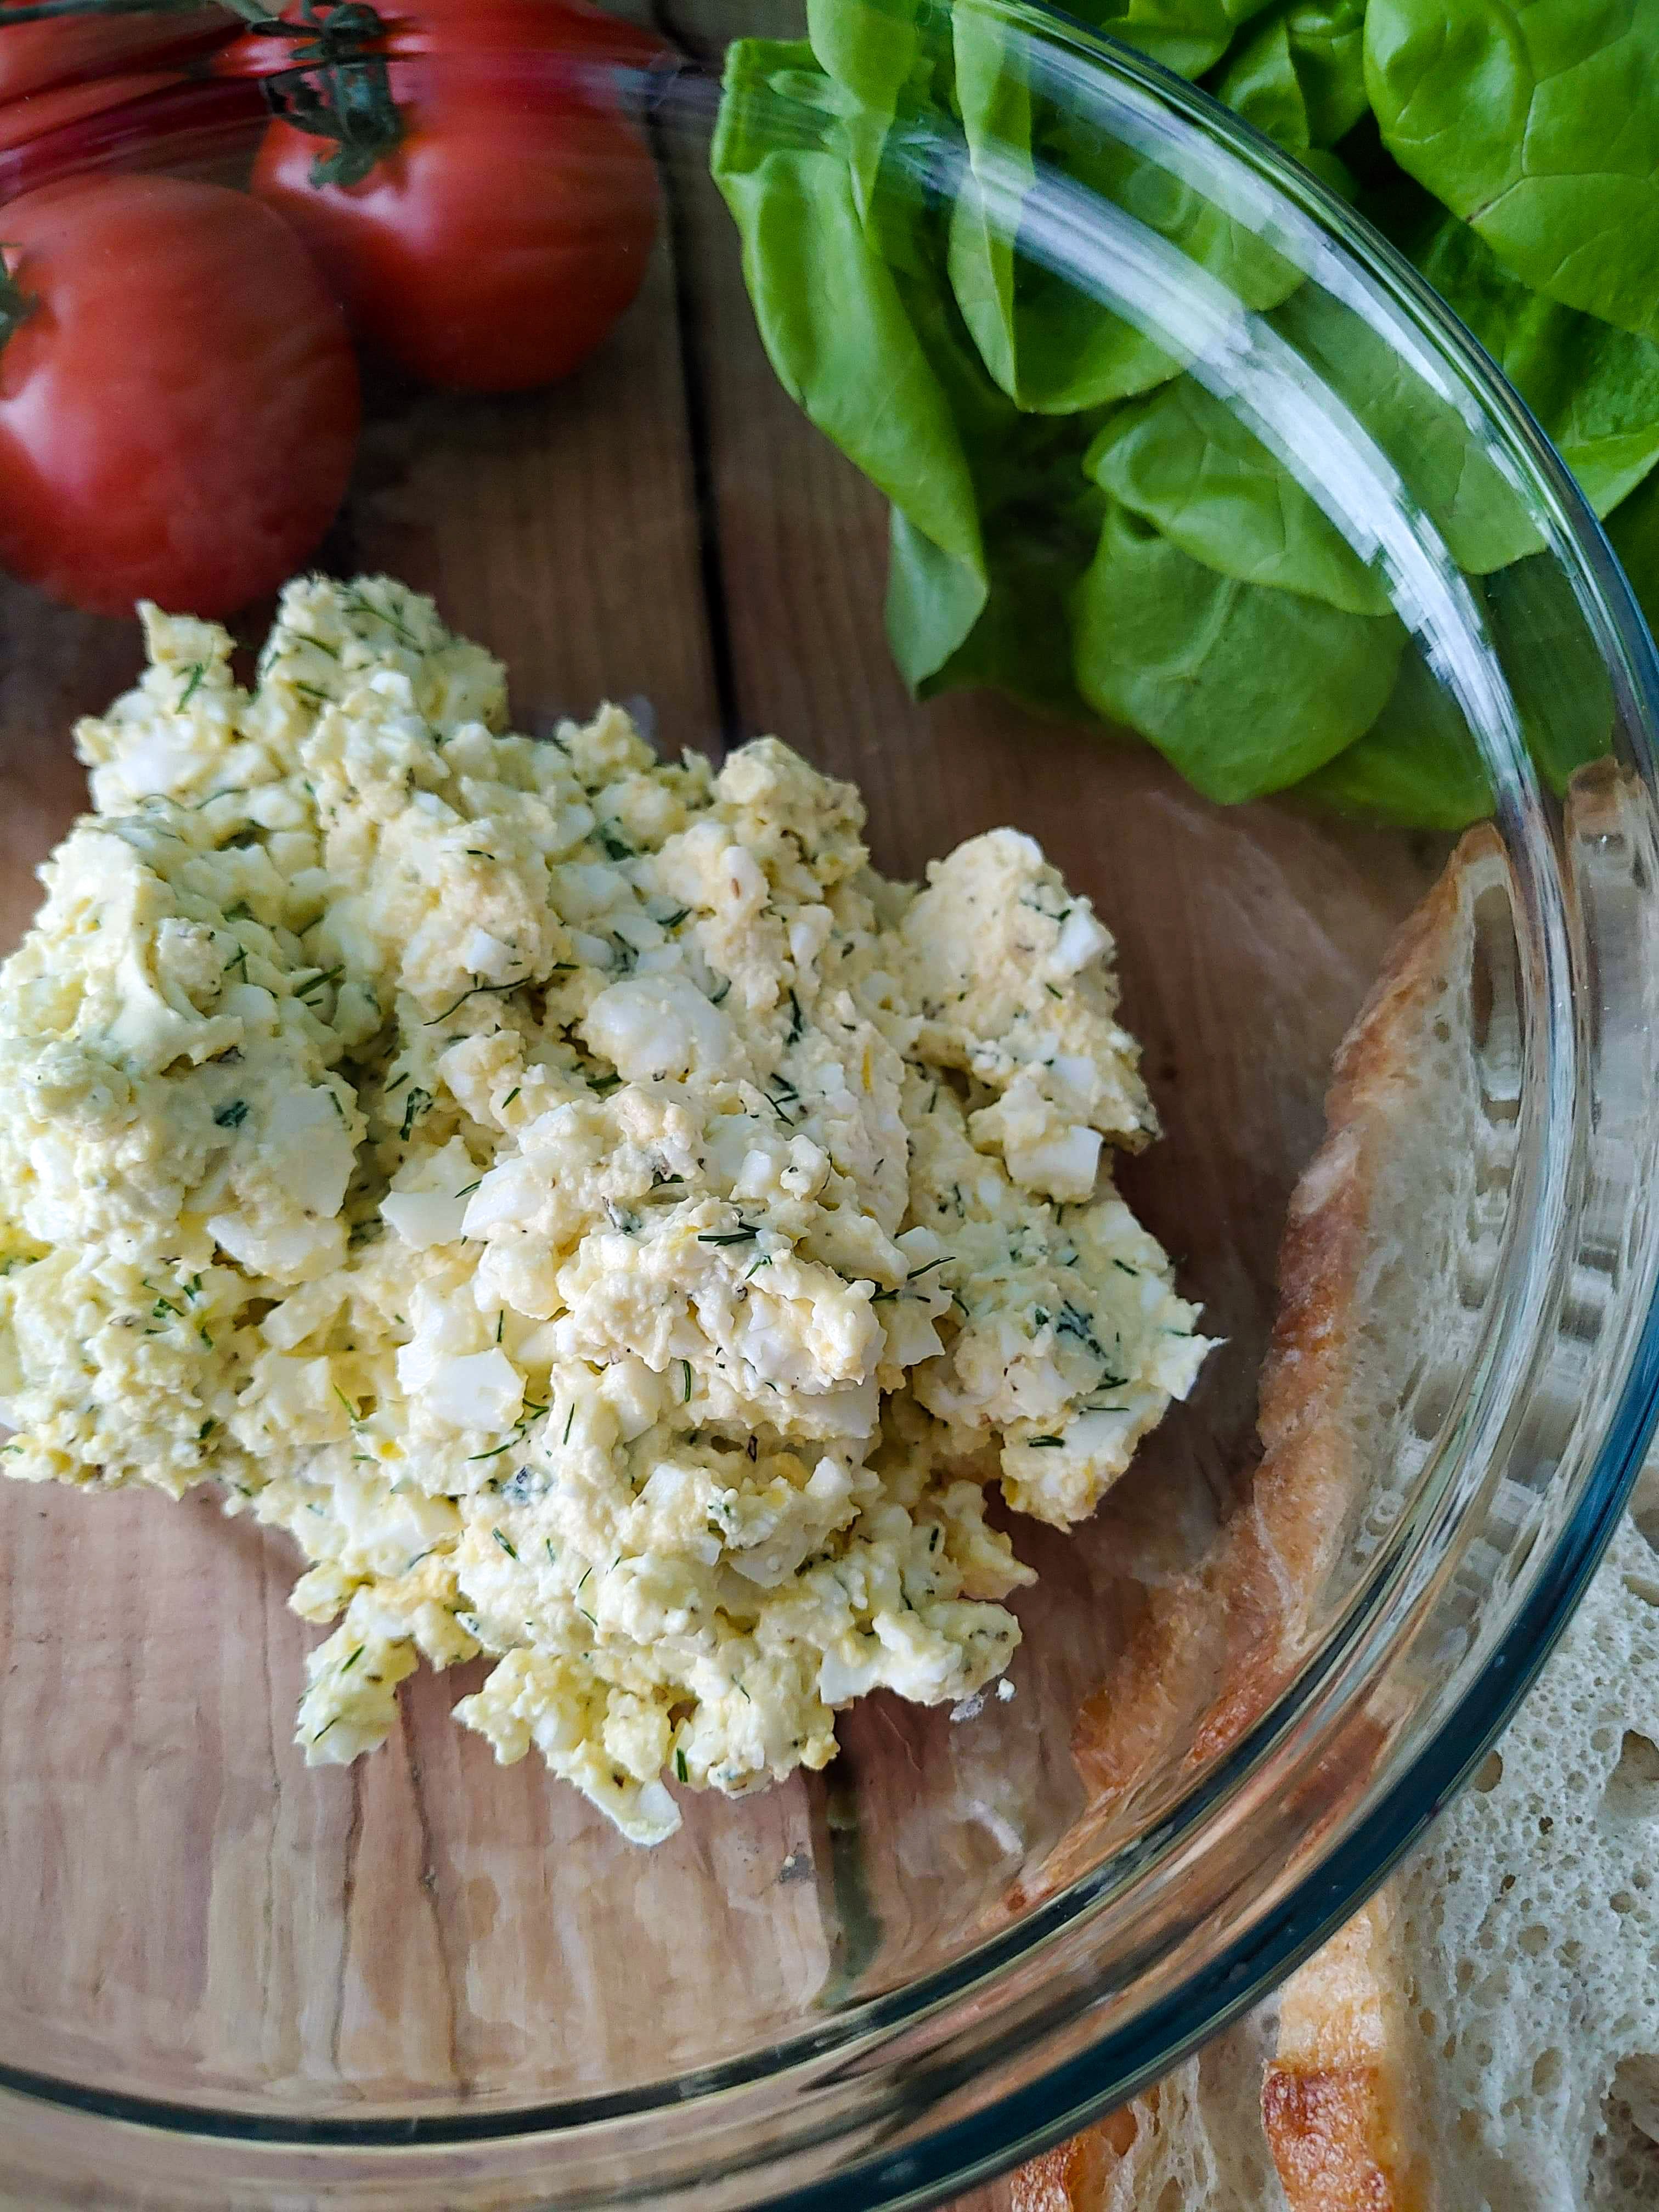 A healthy egg salad made with feta, Greek yogourt, lemon and dill, perfect for sandwiches.